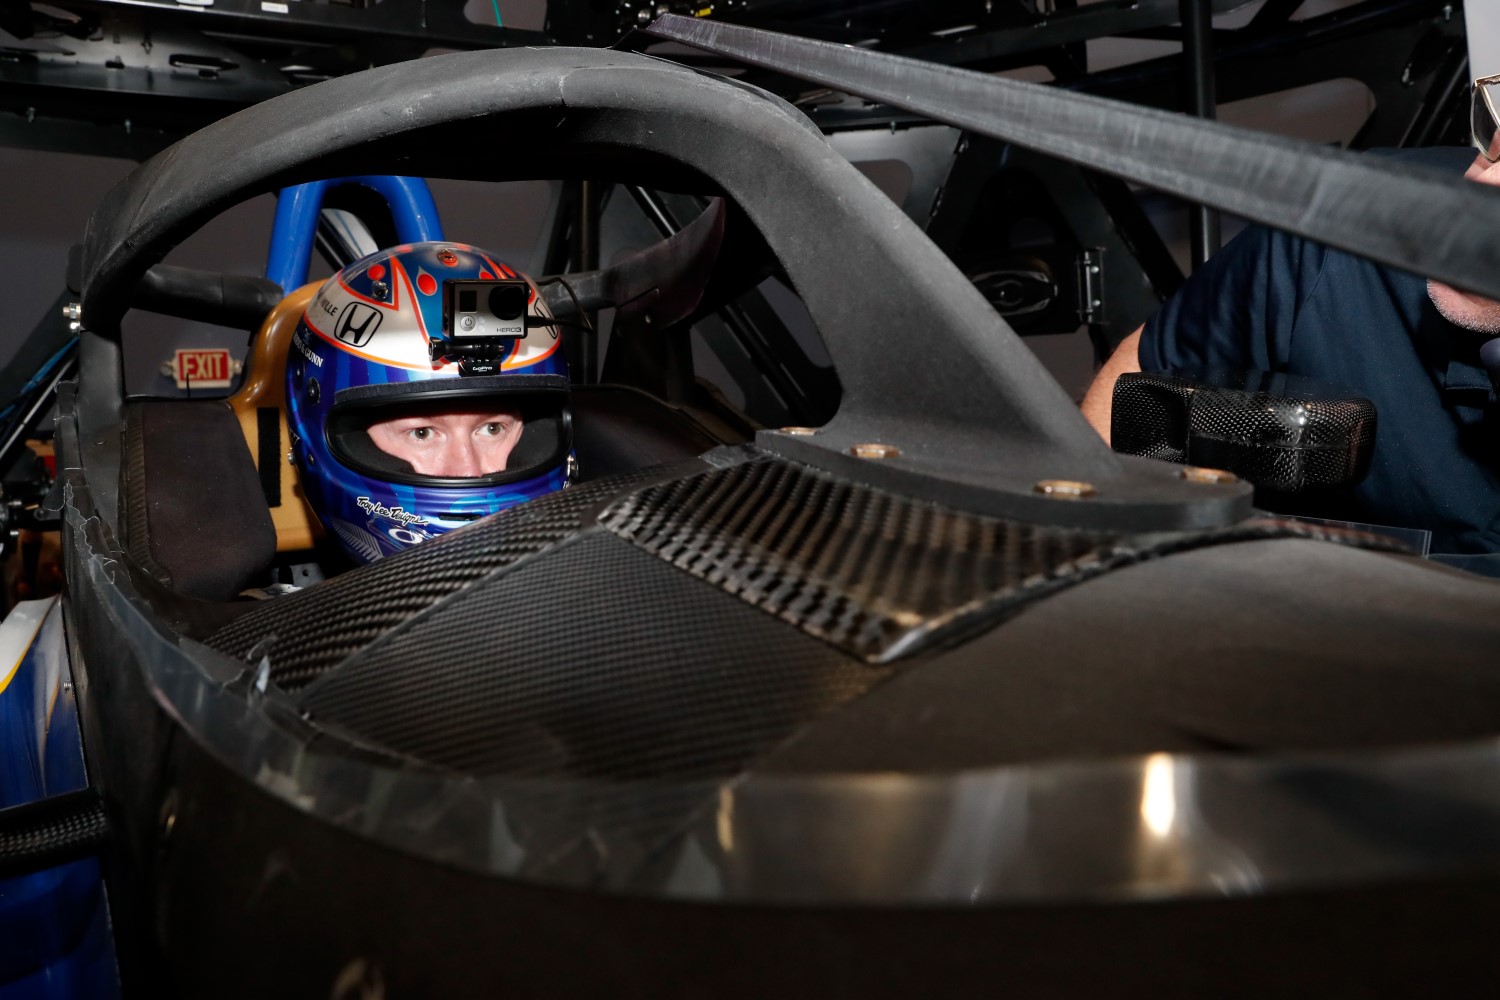 Dixon tests the Halo portion of the new IndyCar aeroscreen